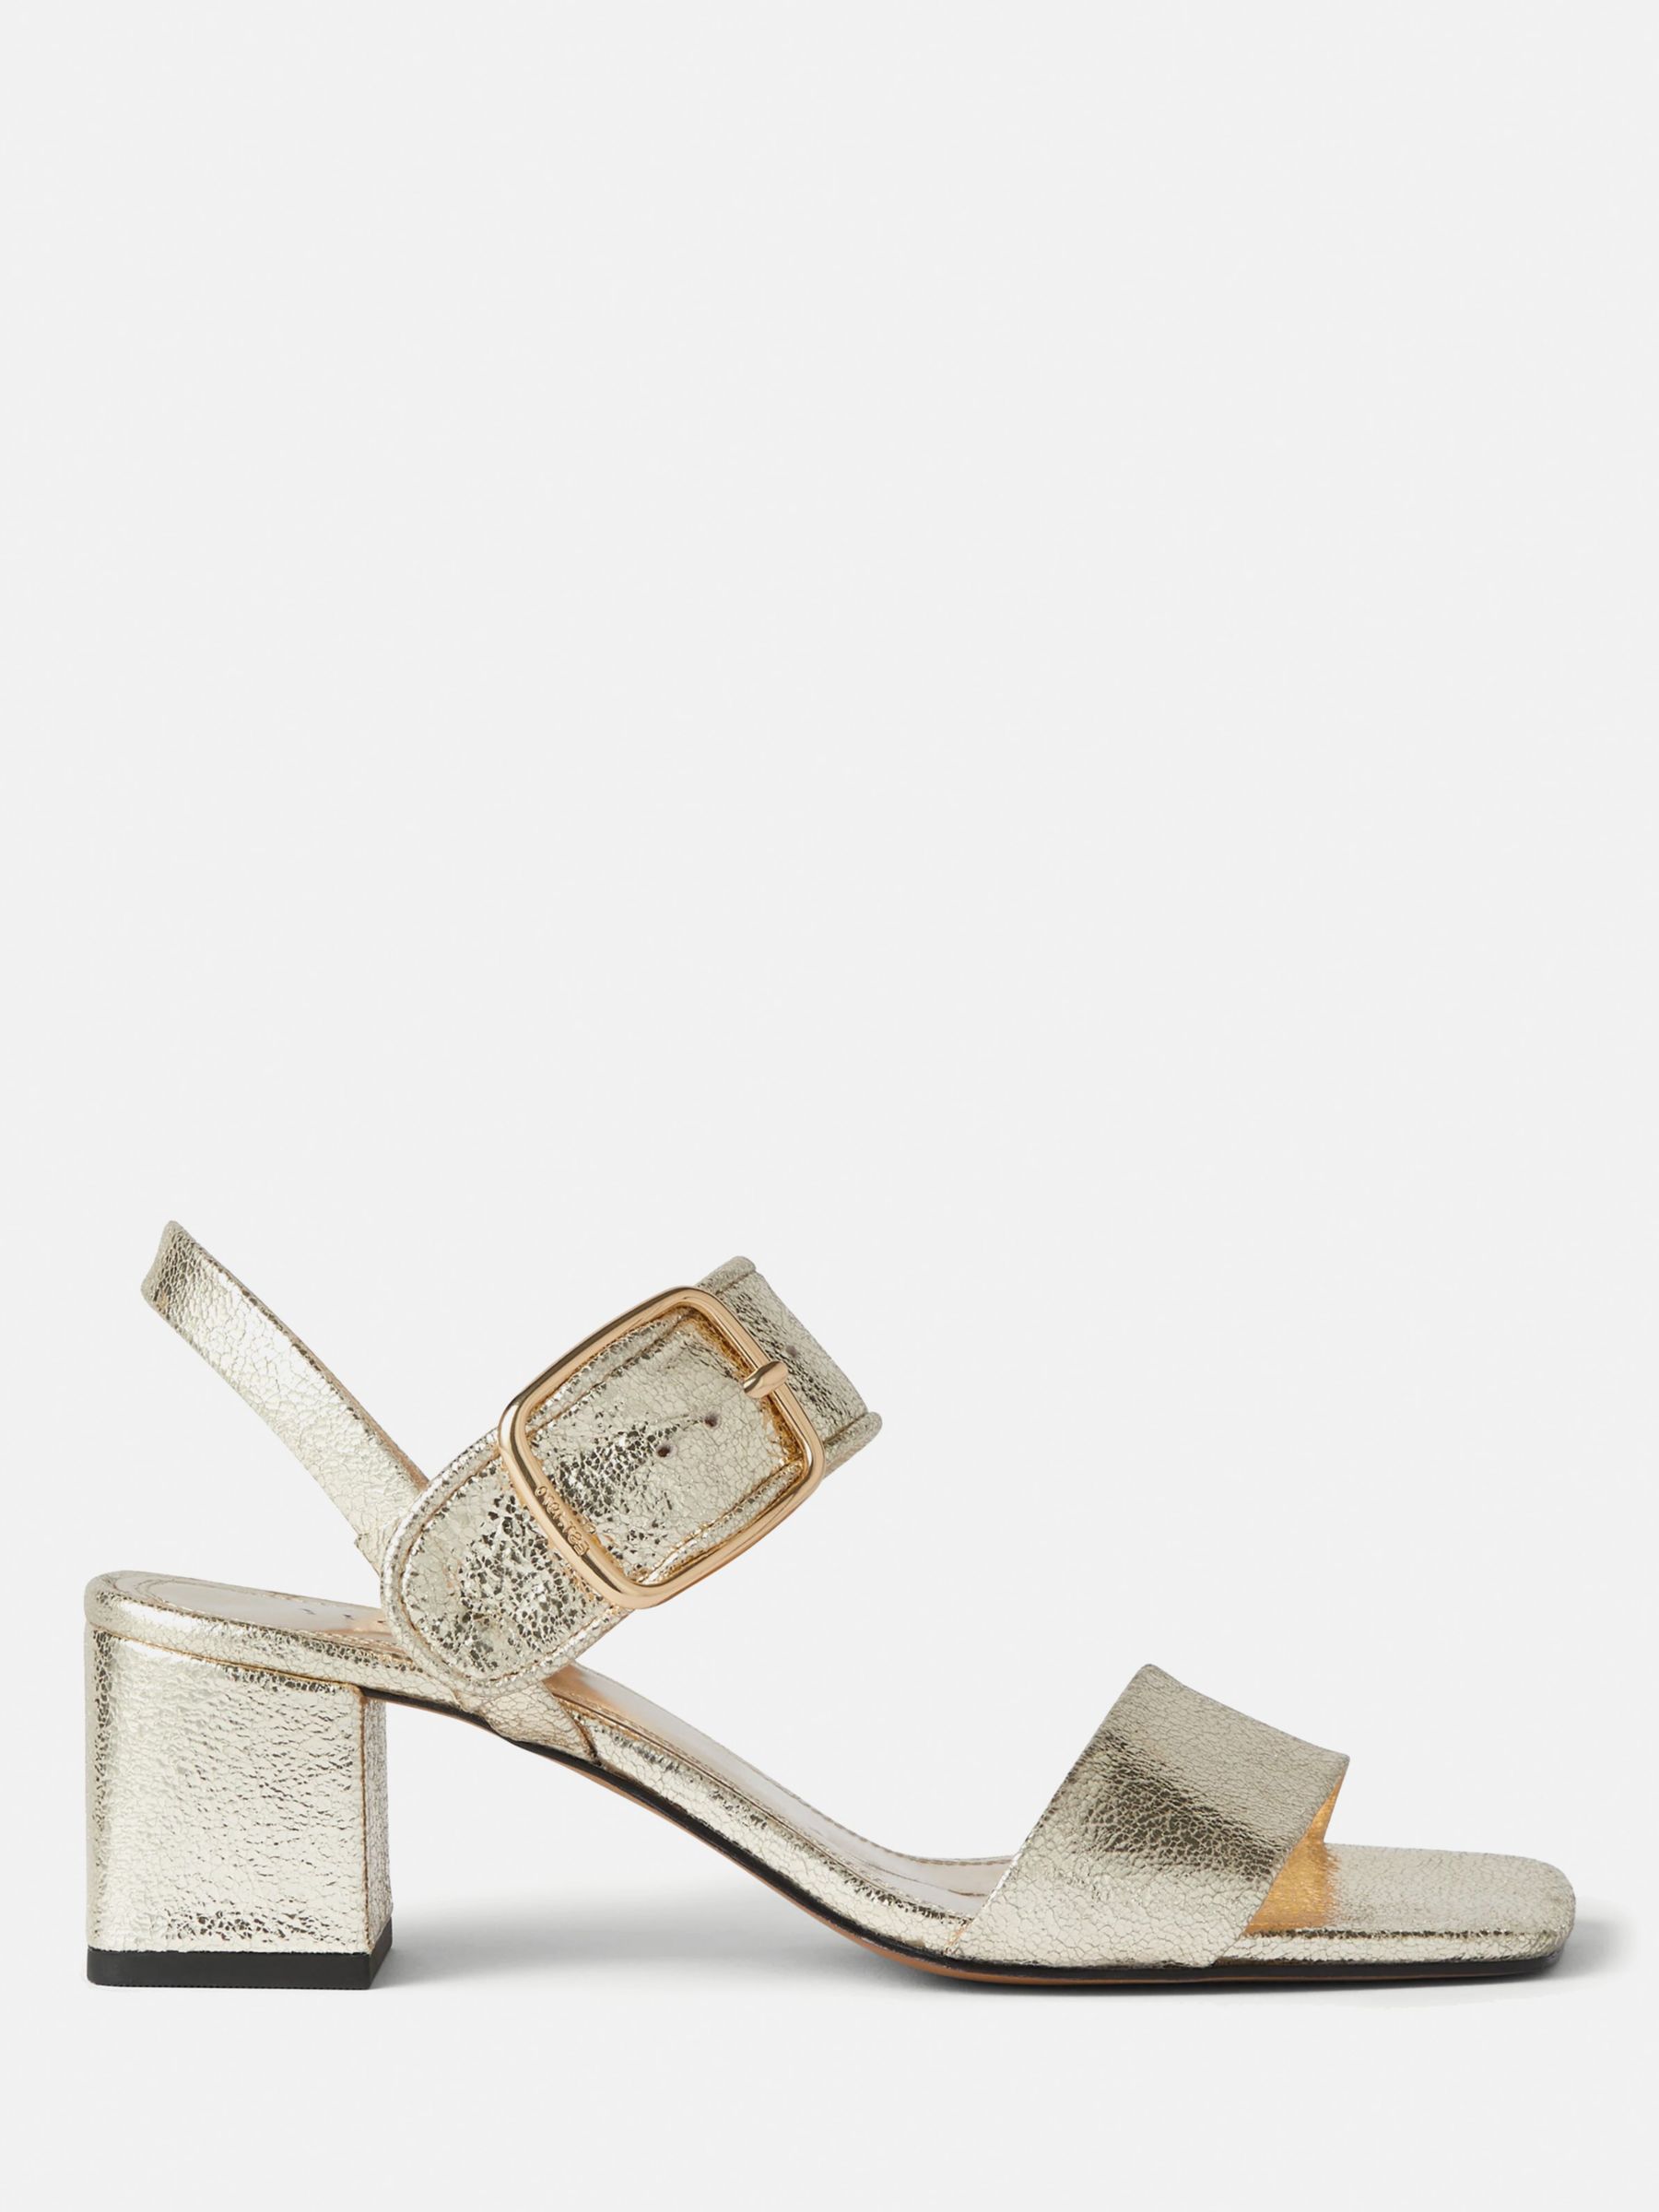 Jigsaw Maybell Leather Block Heel Sandals, Gold, 3